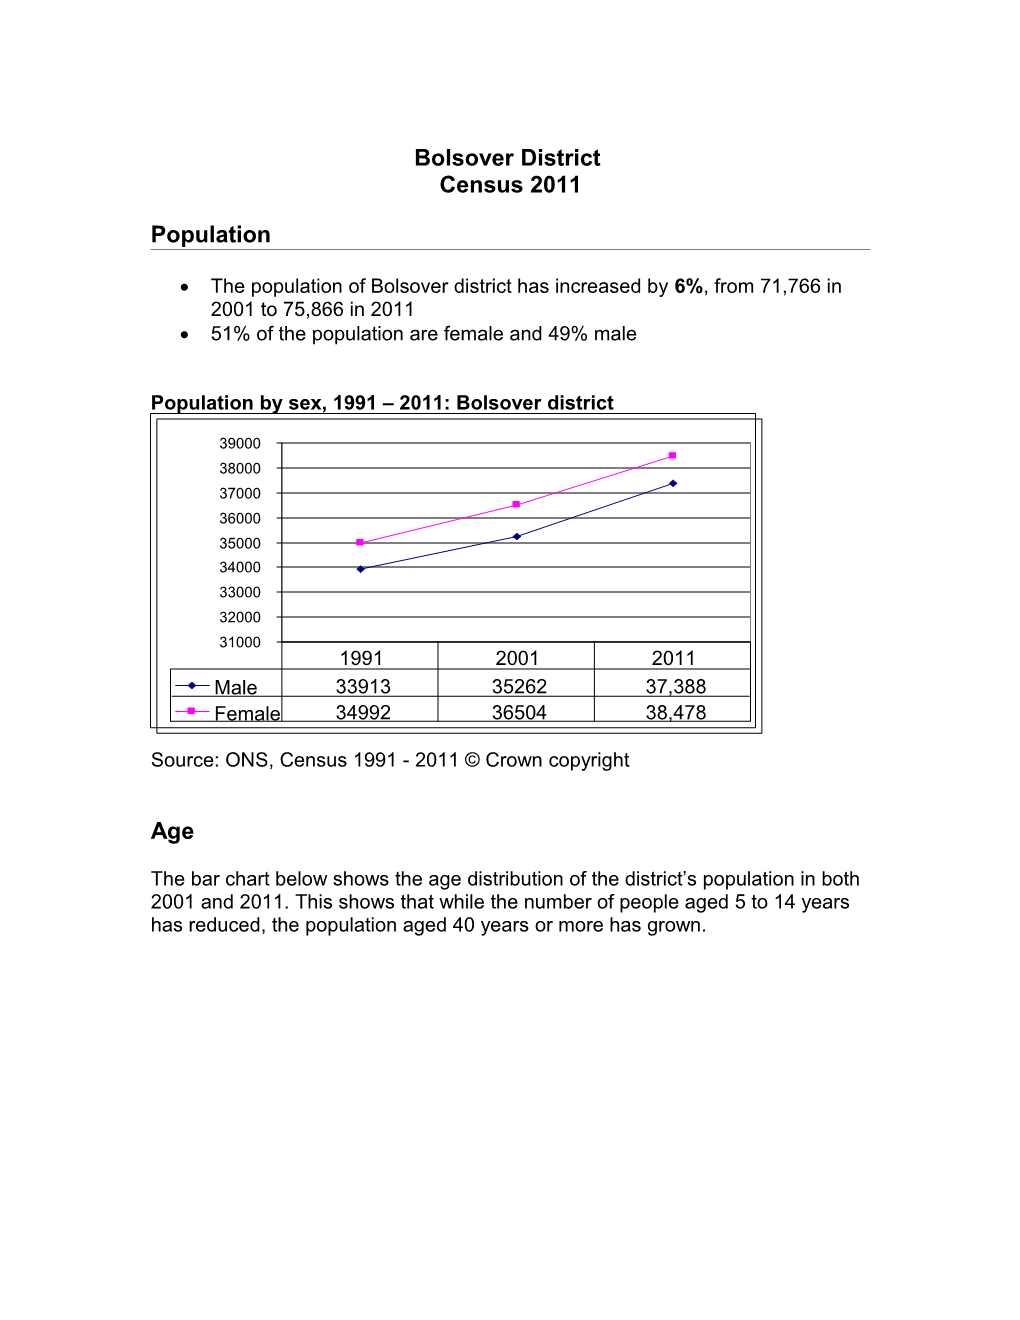 Population by Sex, 1991 2011: Bolsover District